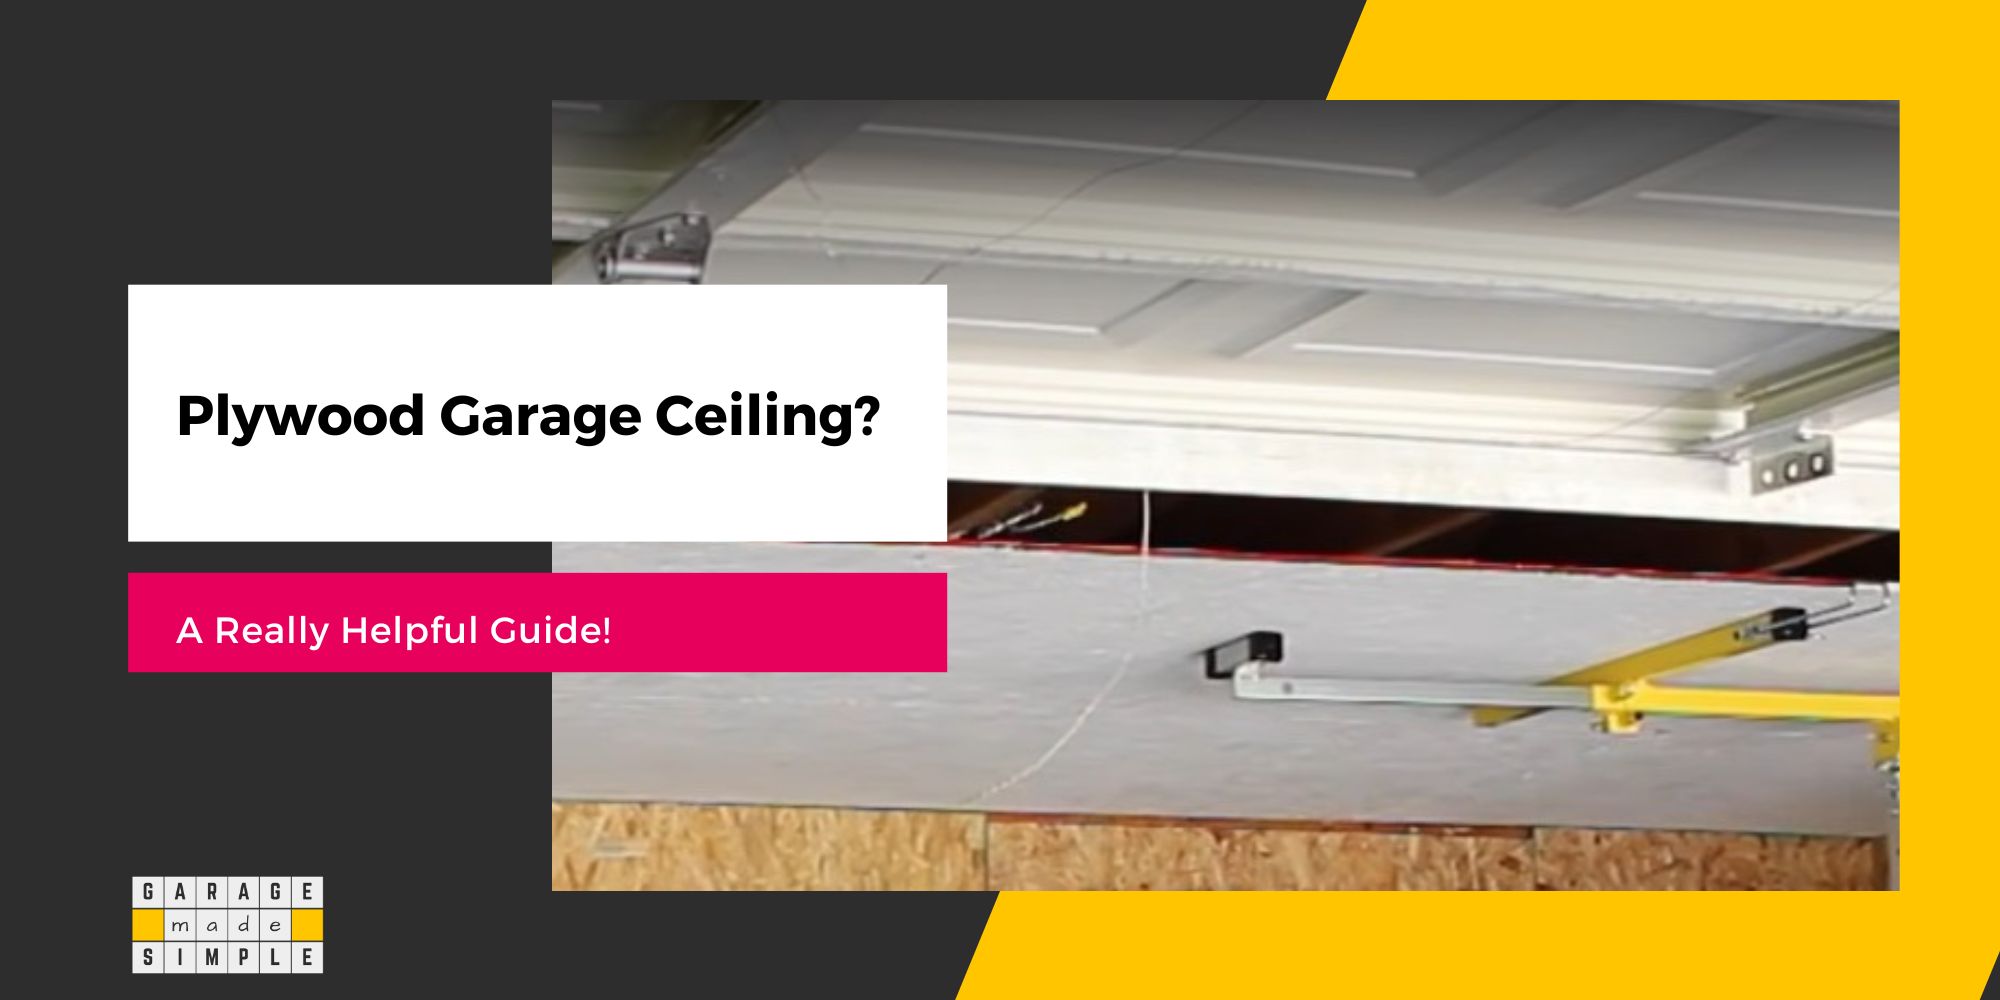 Can You Use Plywood for a Garage Ceiling? (A Really Helpful Guide!)